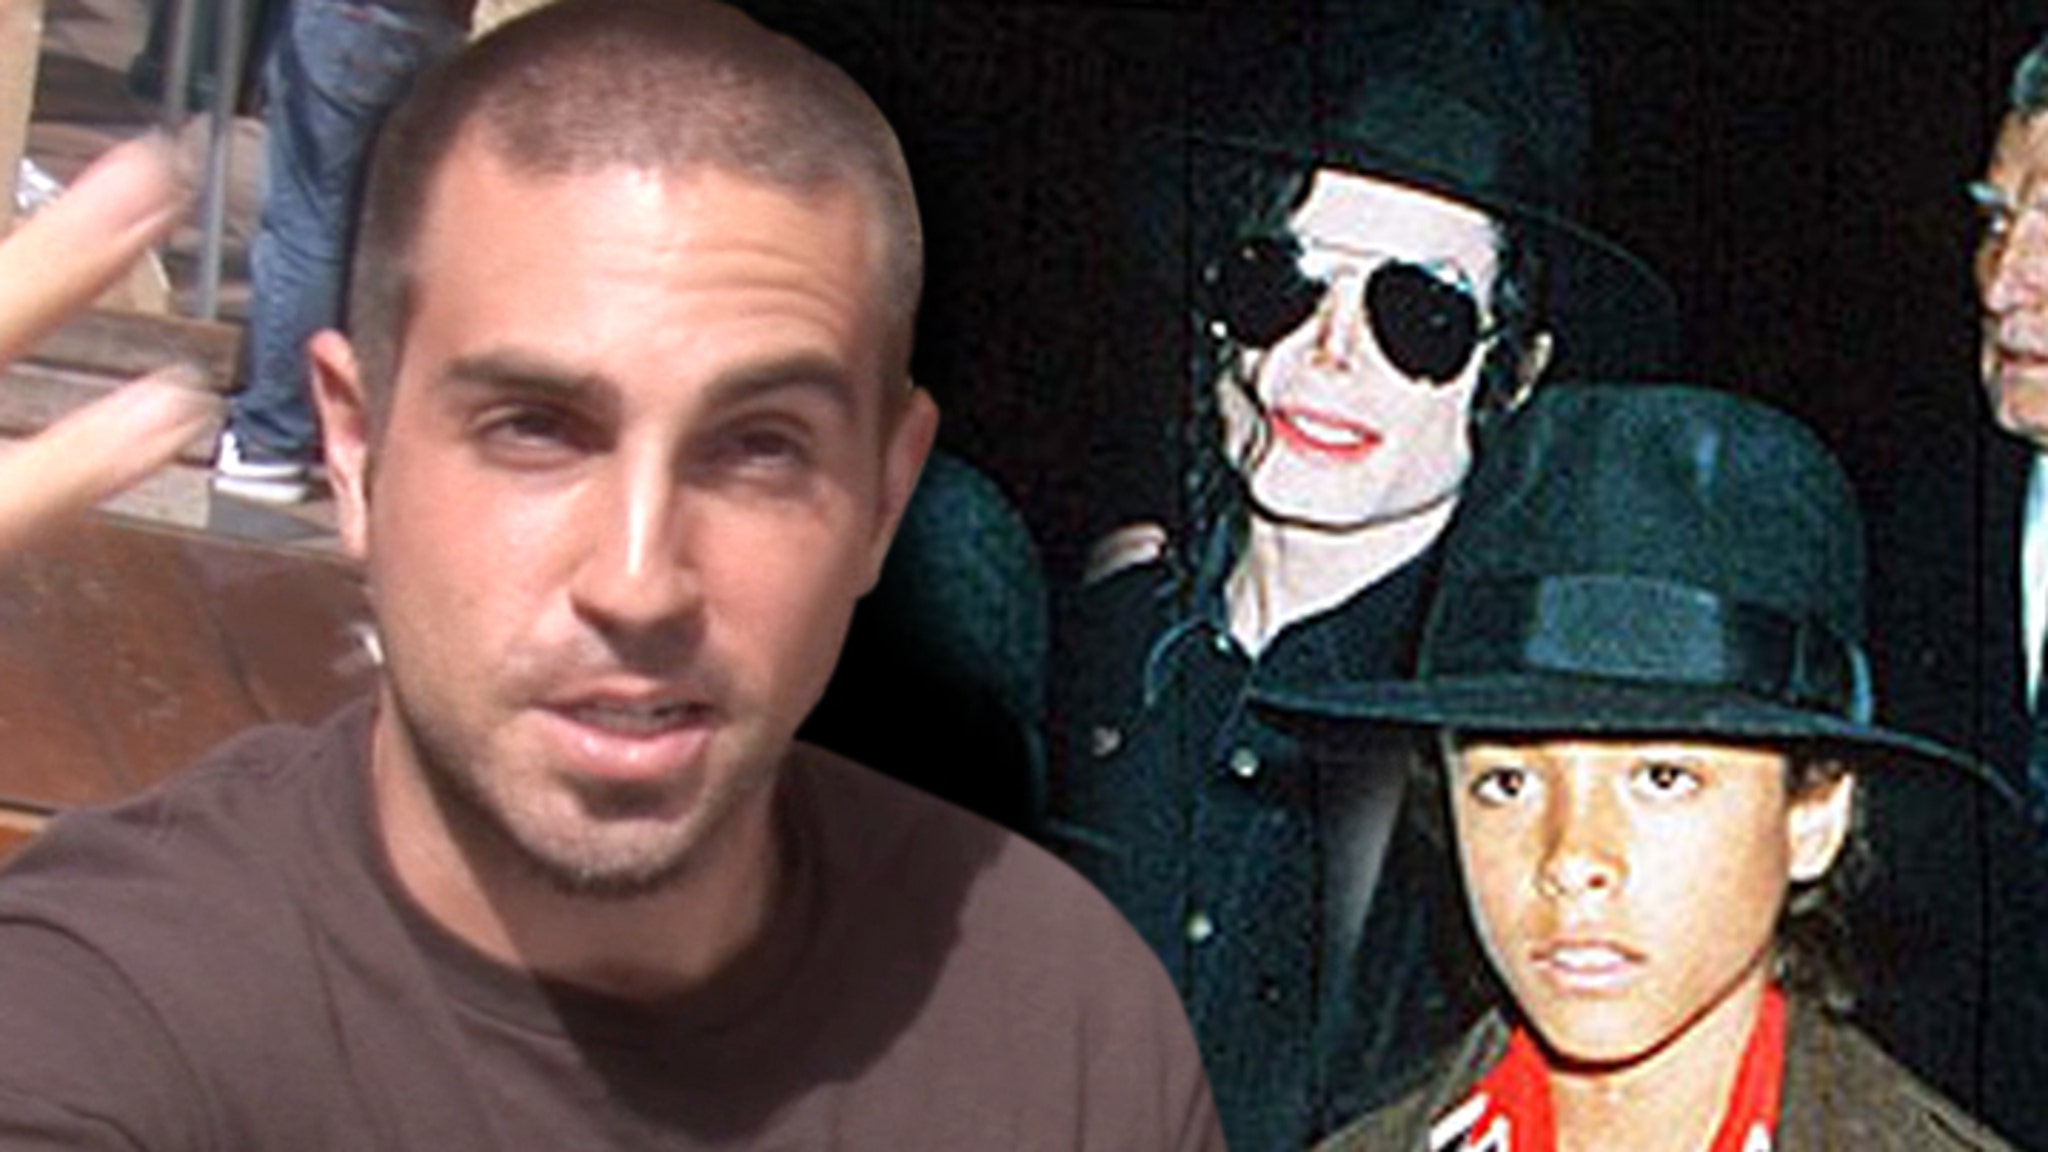 Michael Jackson's Alleged Victim On the for $20 Boy